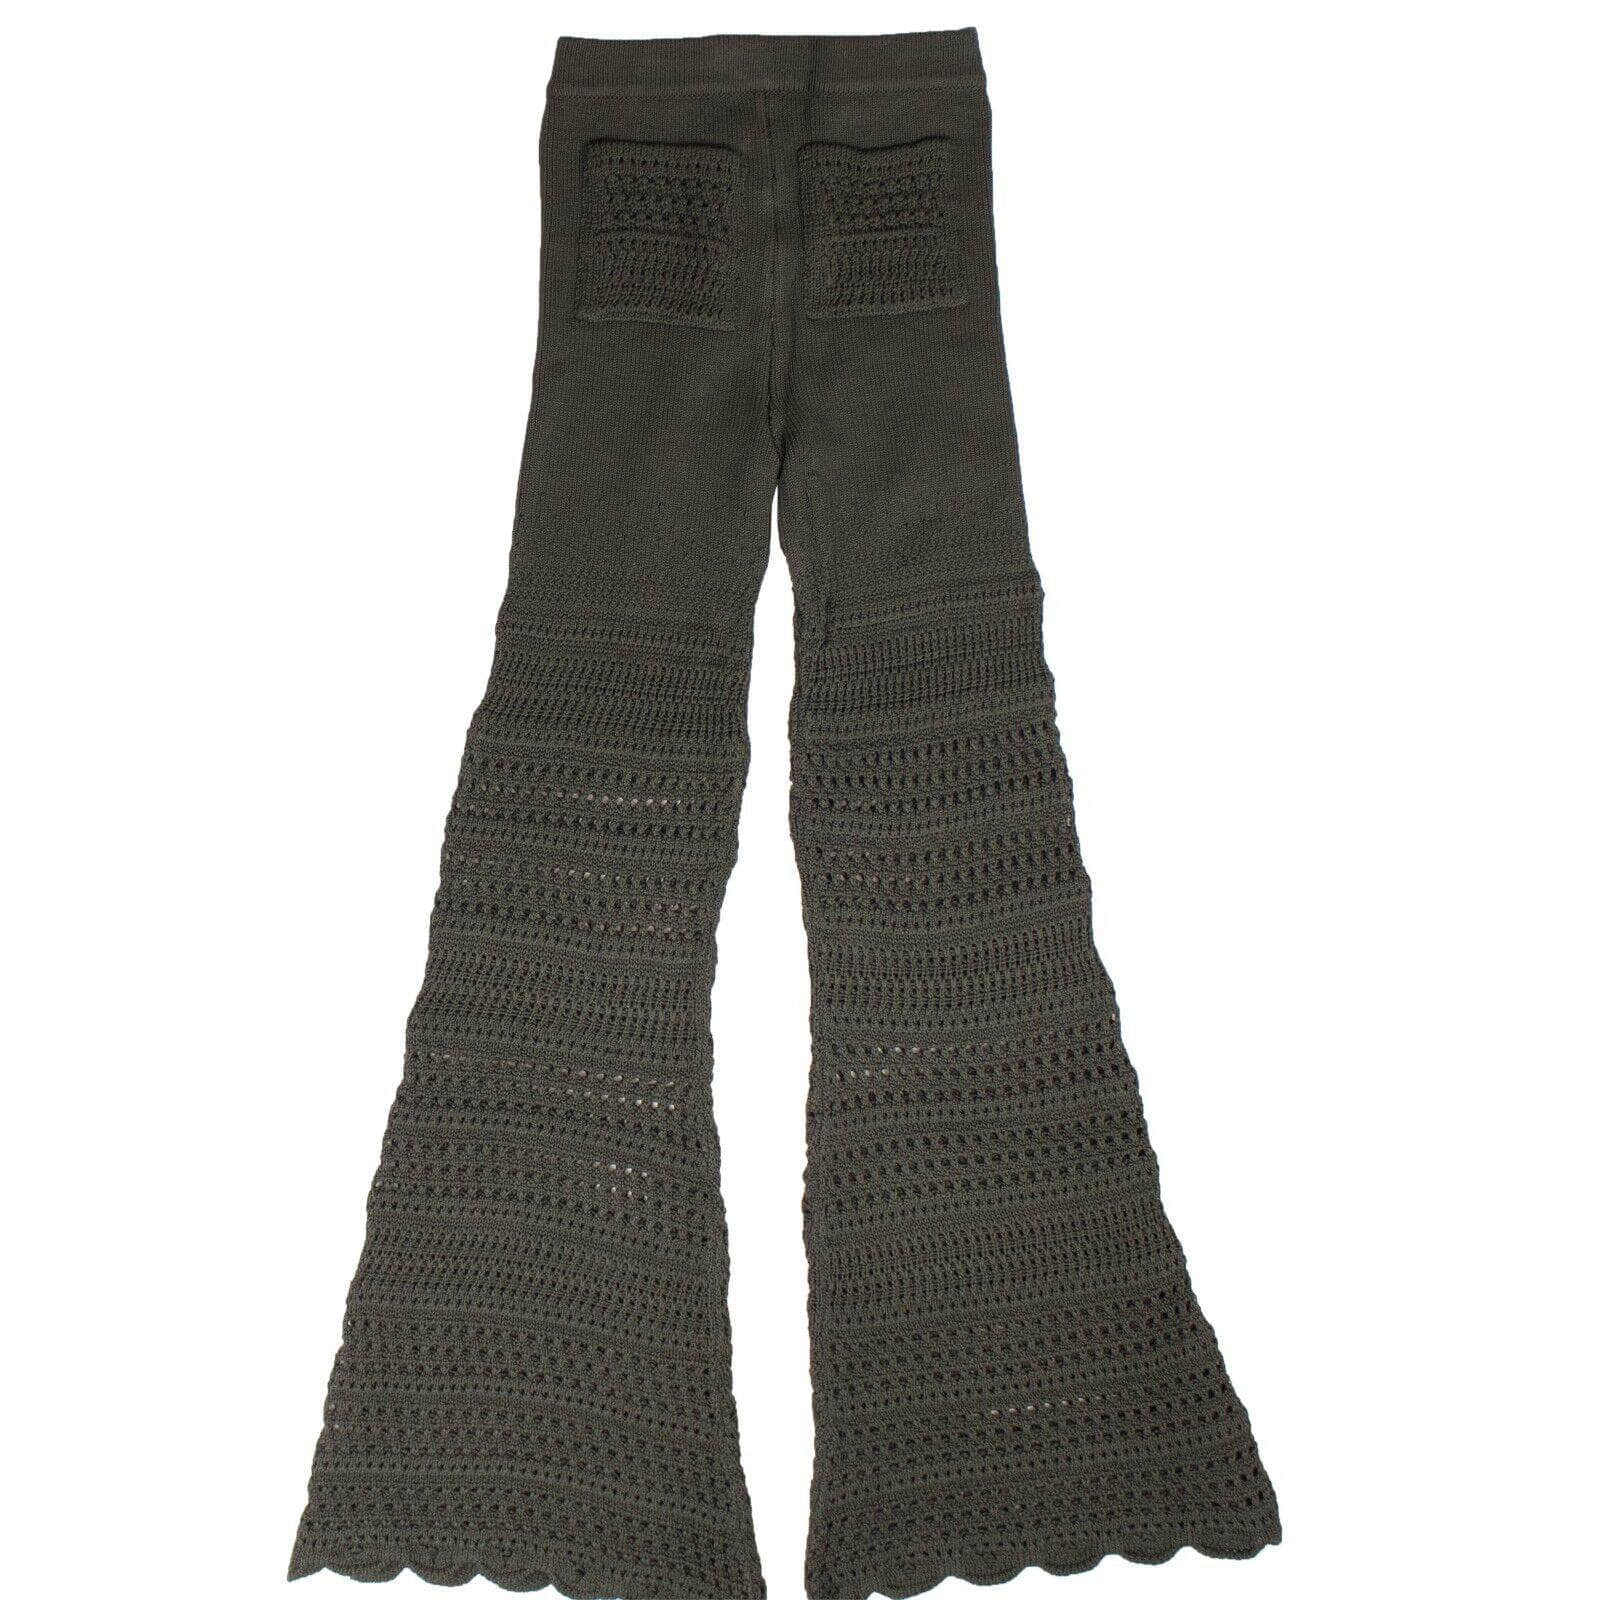 https://gbny.com/cdn/shop/files/amiri-250-500-amiri-channelenable-all-chicmi-couponcollection-gender-womens-main-clothing-size-l-size-m-size-s-size-xs-womens-straight-pants-dark-green-checkered-crochet-flare-pants-2_a92d8037-3833-4a3e-9e0e-786579b02b3f.jpg?v=1693433742&width=1600